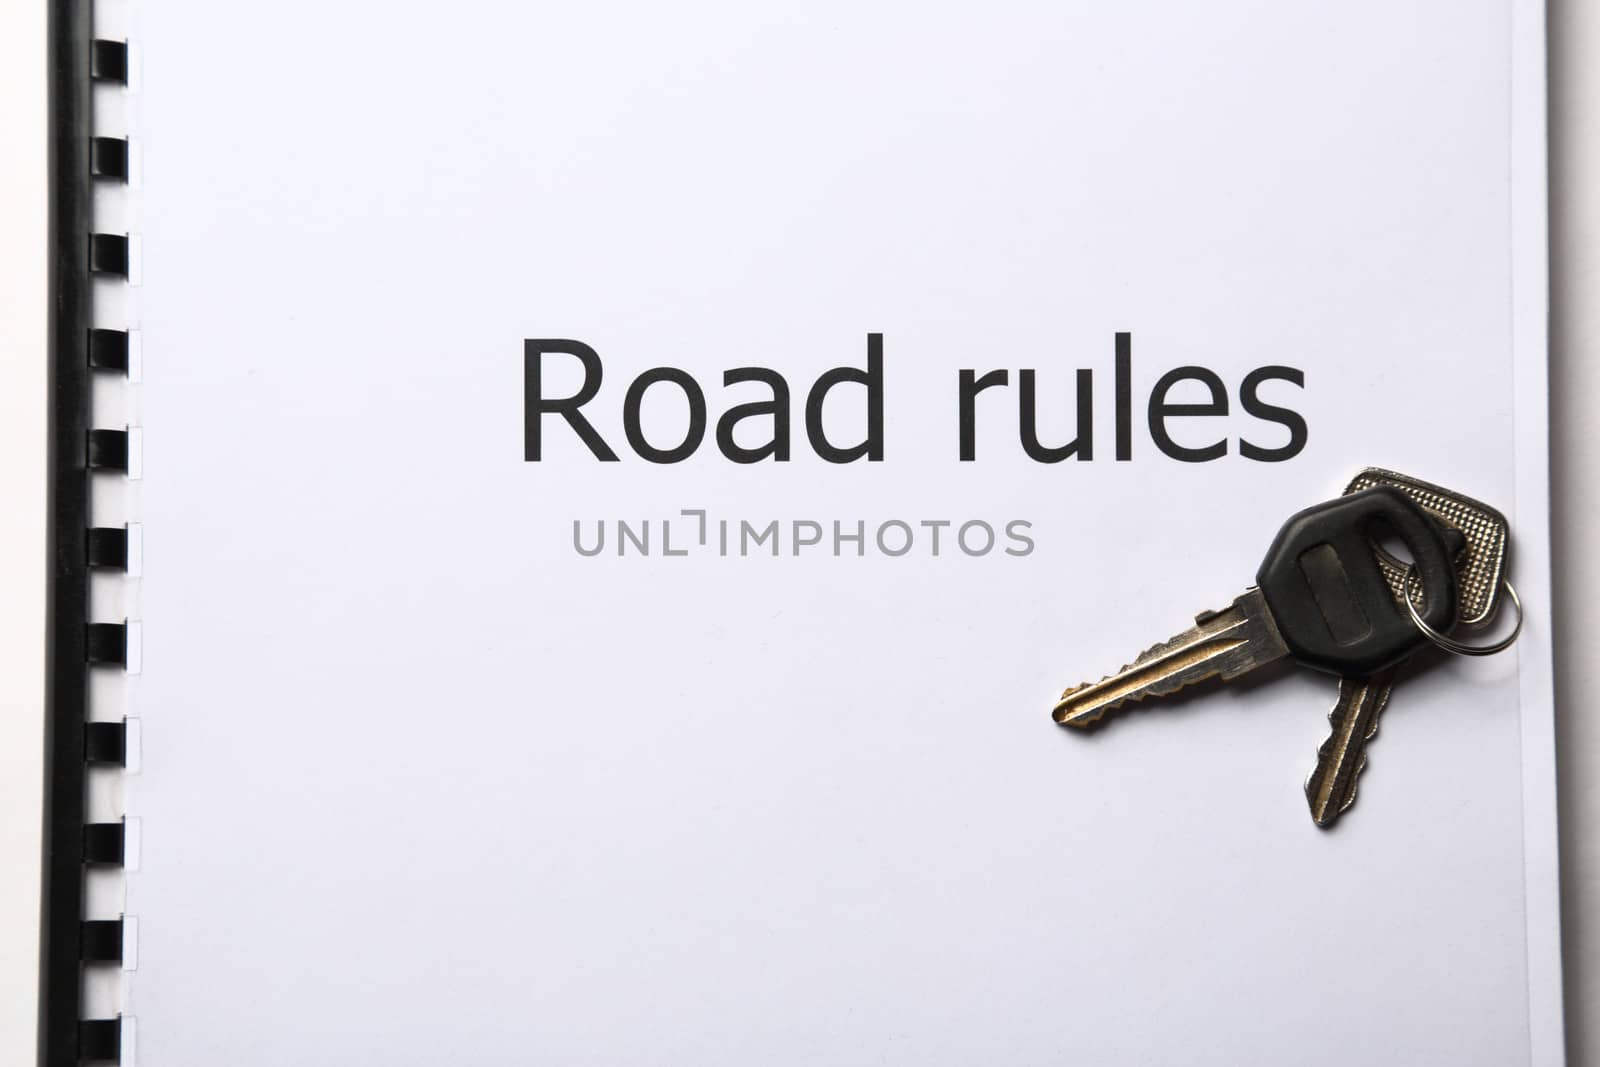 Road rules register with car keys